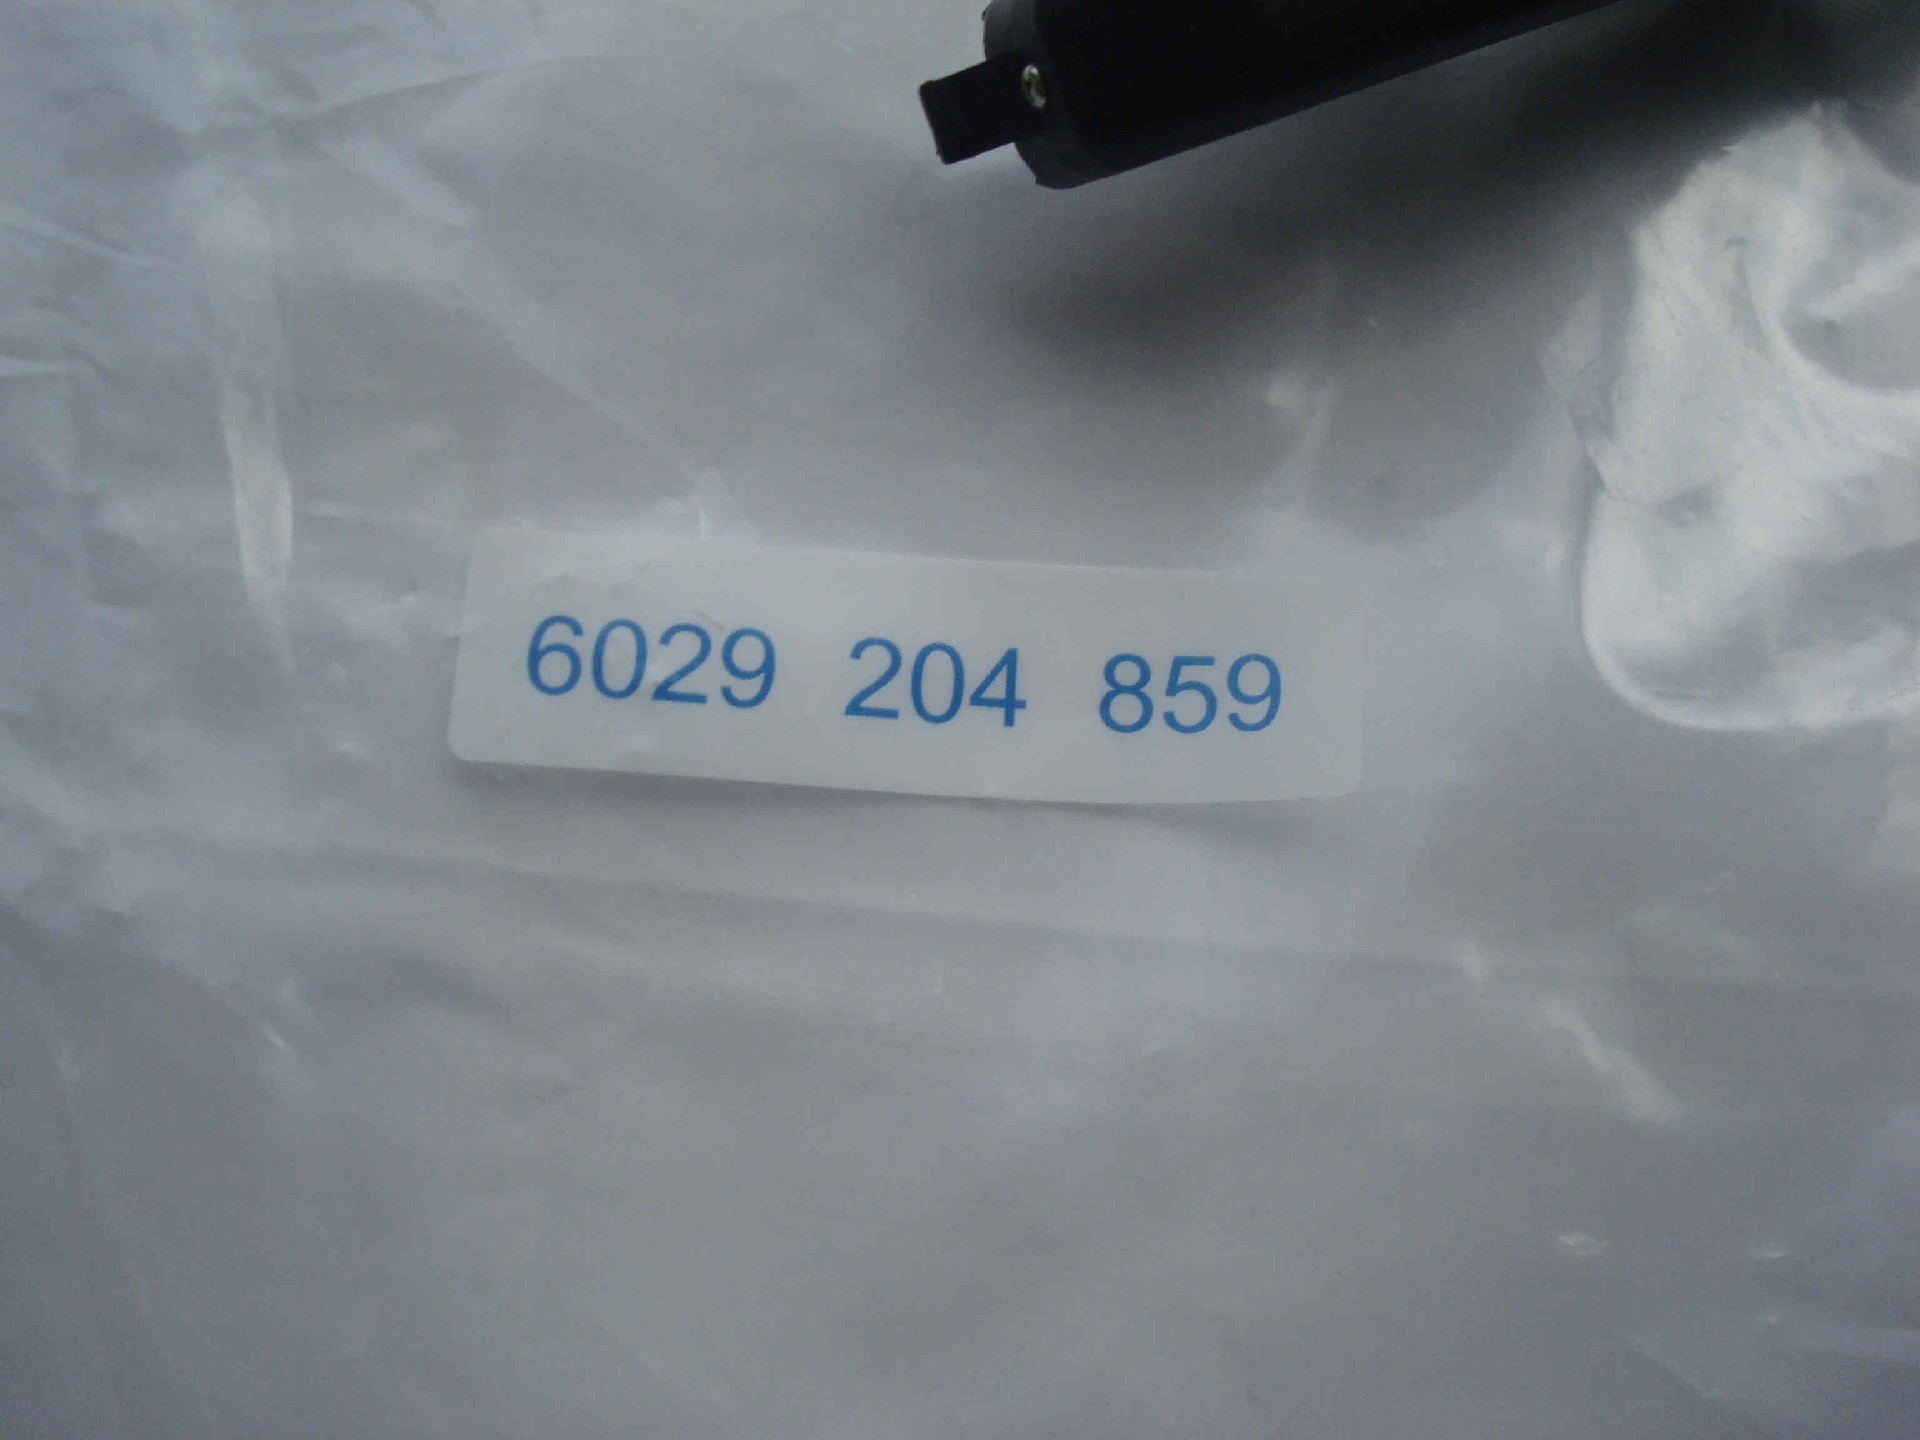 6029204859 cable gland